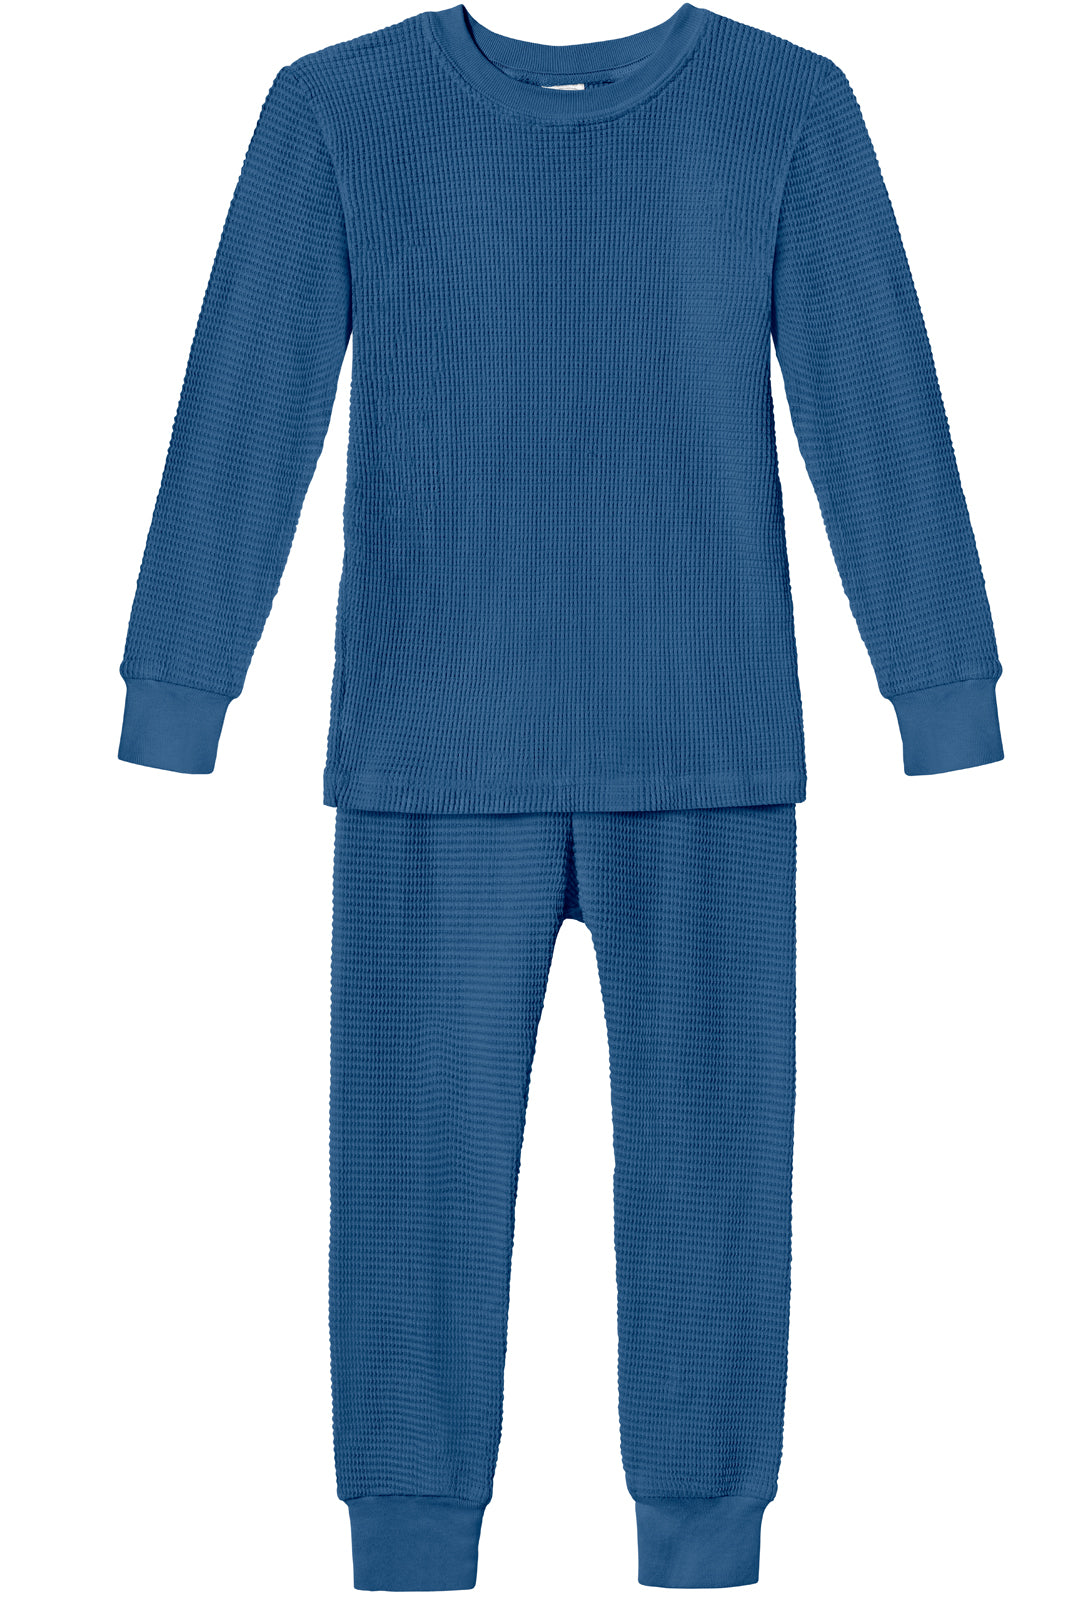 Boys and Girls 100% Cotton Soft & Warm Heavier Thermal Long